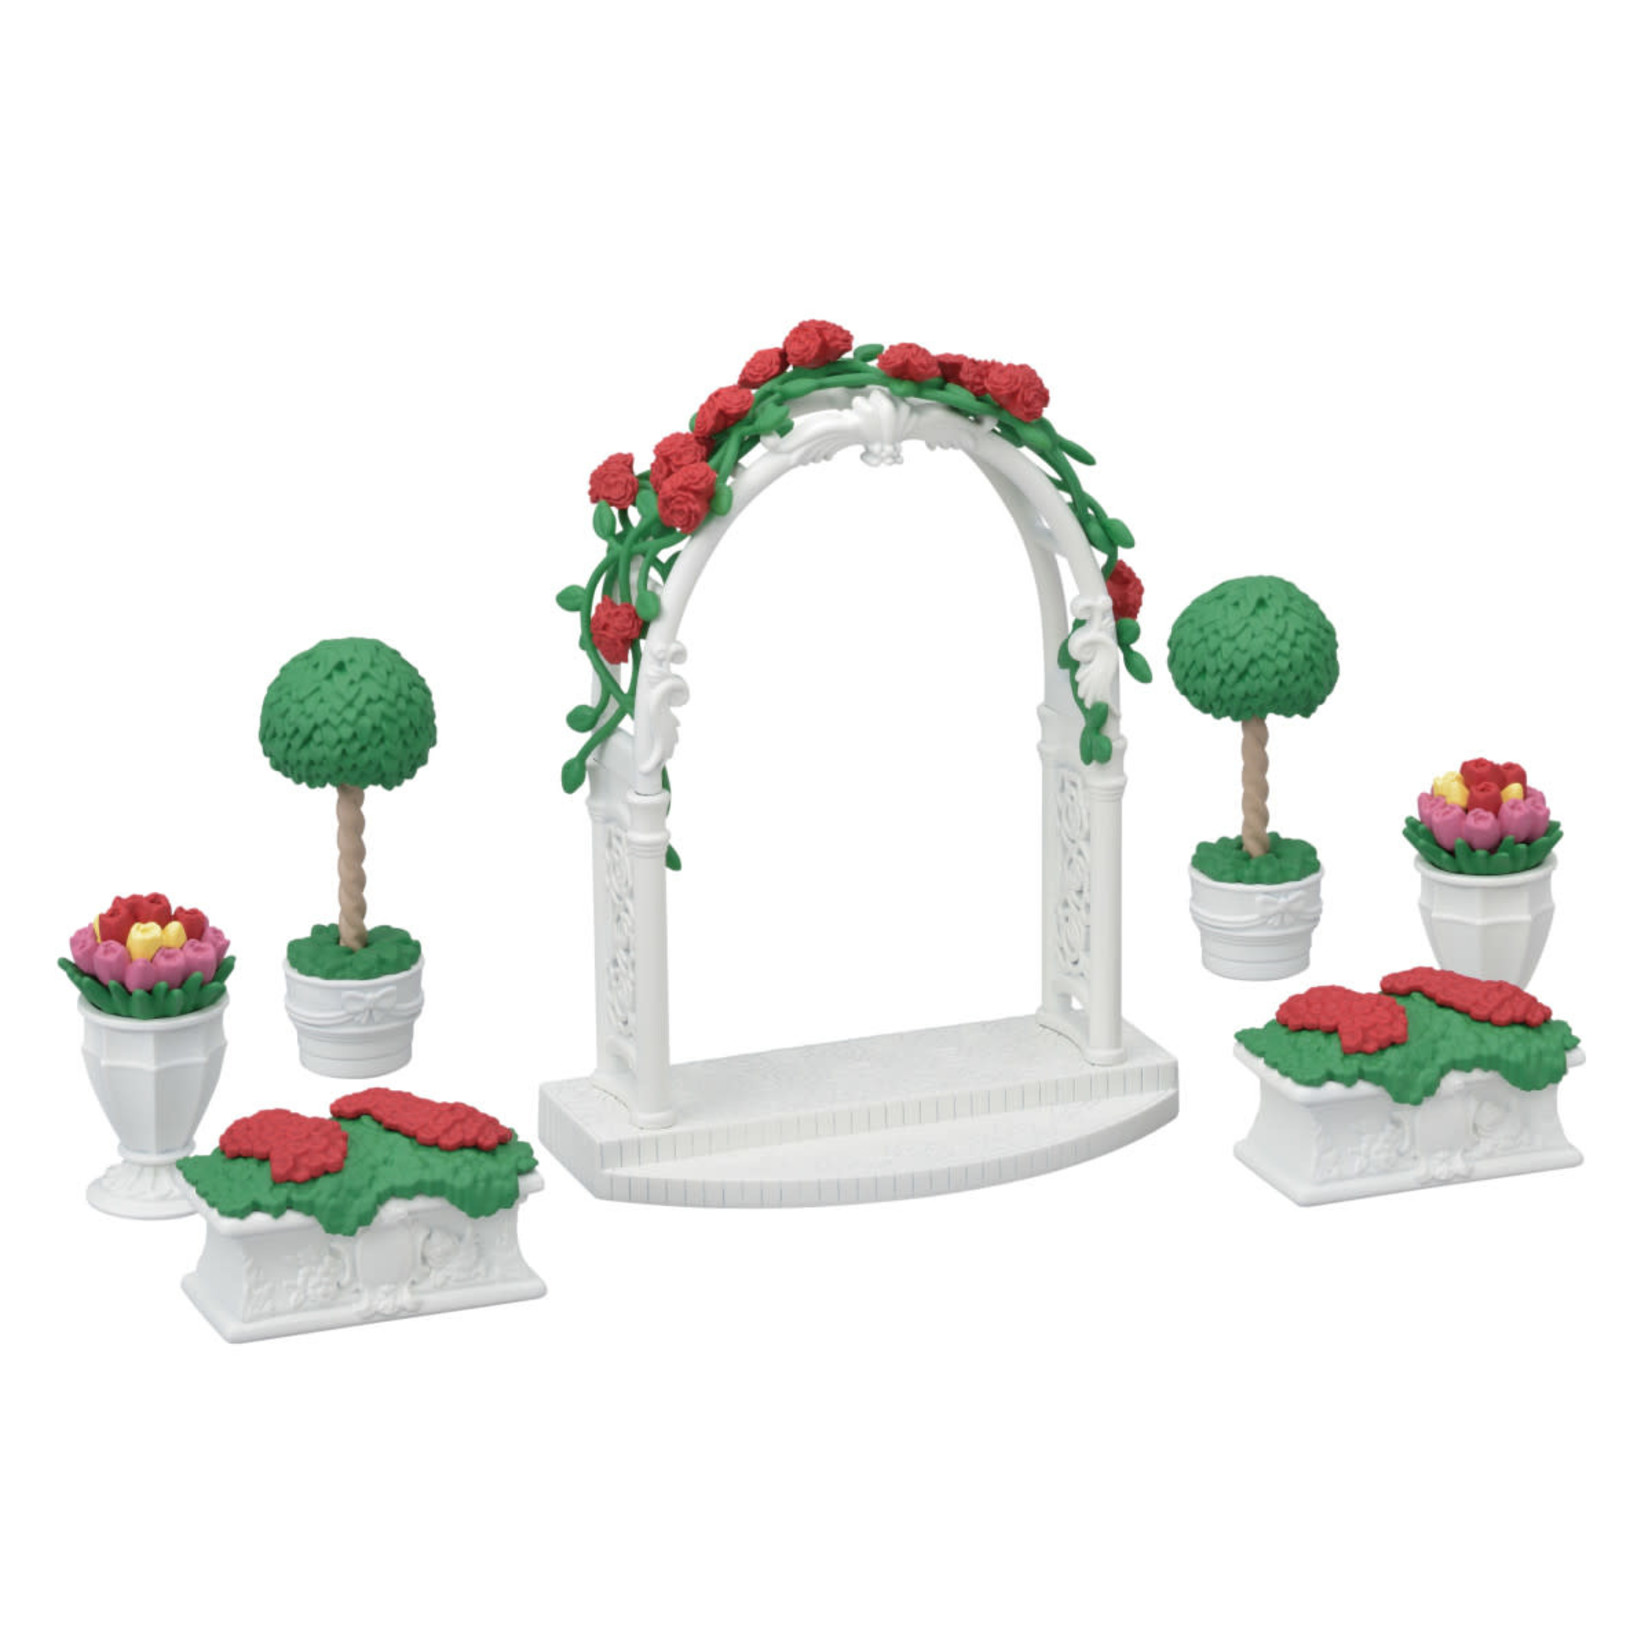 Calico Critters Calico Critters Floral Garden Set